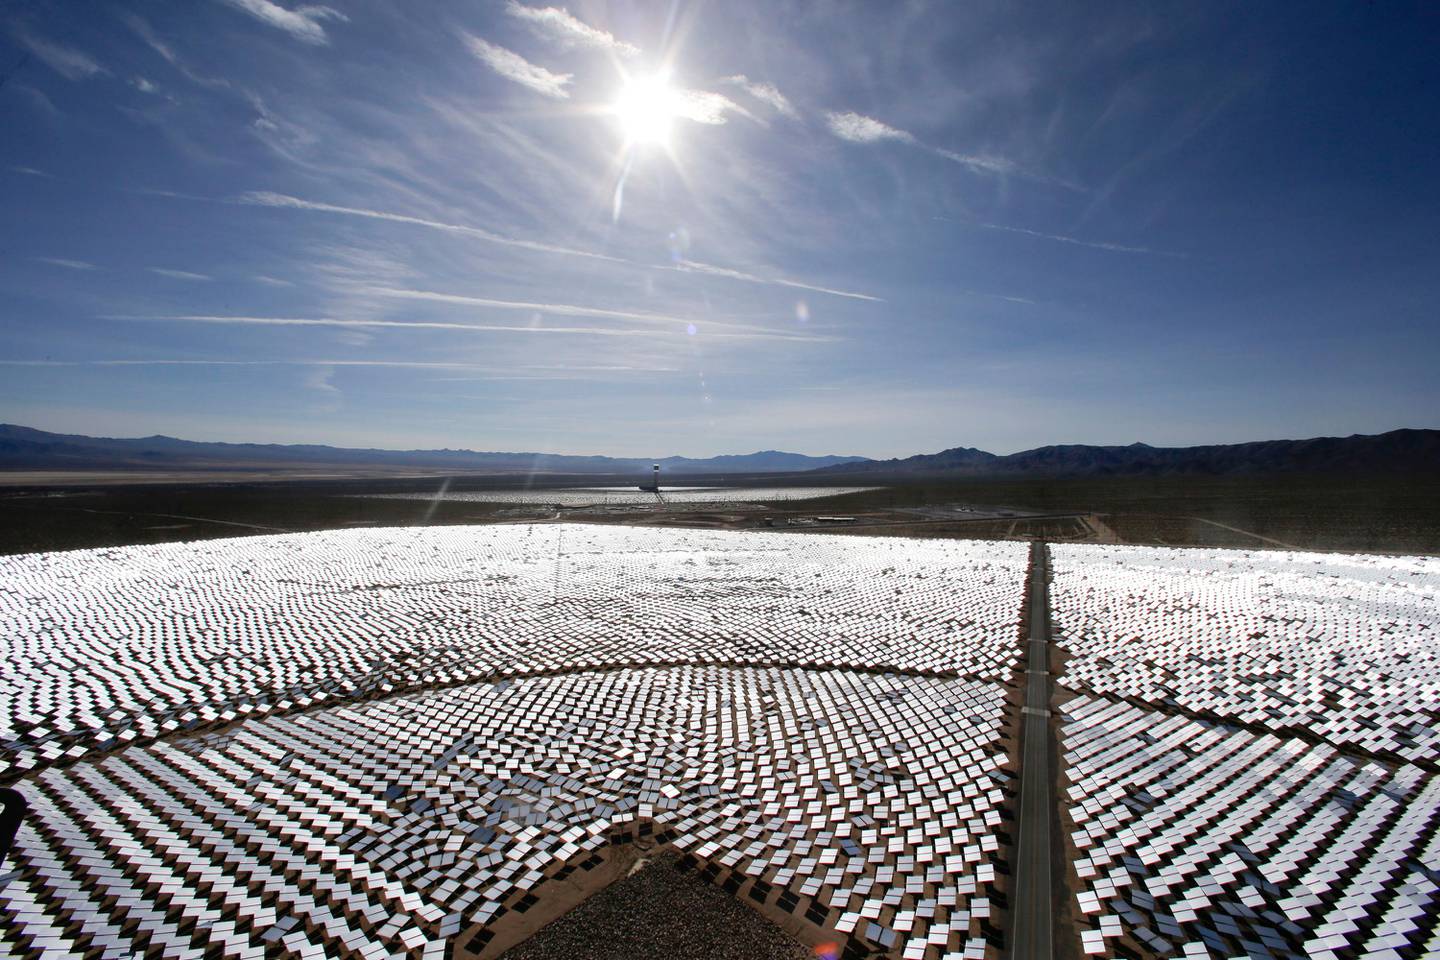 FILE - This Feb. 11, 2014 file photo shows some of the 300,000 computer-controlled mirrors, at the Ivanpah Solar ElectirIc Generating System in Primm, Nev. State and federal officials sought Tuesday, Sept. 23, 2014, to bring order to California's boom for renewable-energy plants in the Mojave and other southern California deserts, releasing a roadmap covering 22.5 million acres that designates some areas for large-scale solar, wind and geothermal plants and others for conservation of desert habitat and animals.(AP Photo/Chris Carlson, File) / TT / kod 436